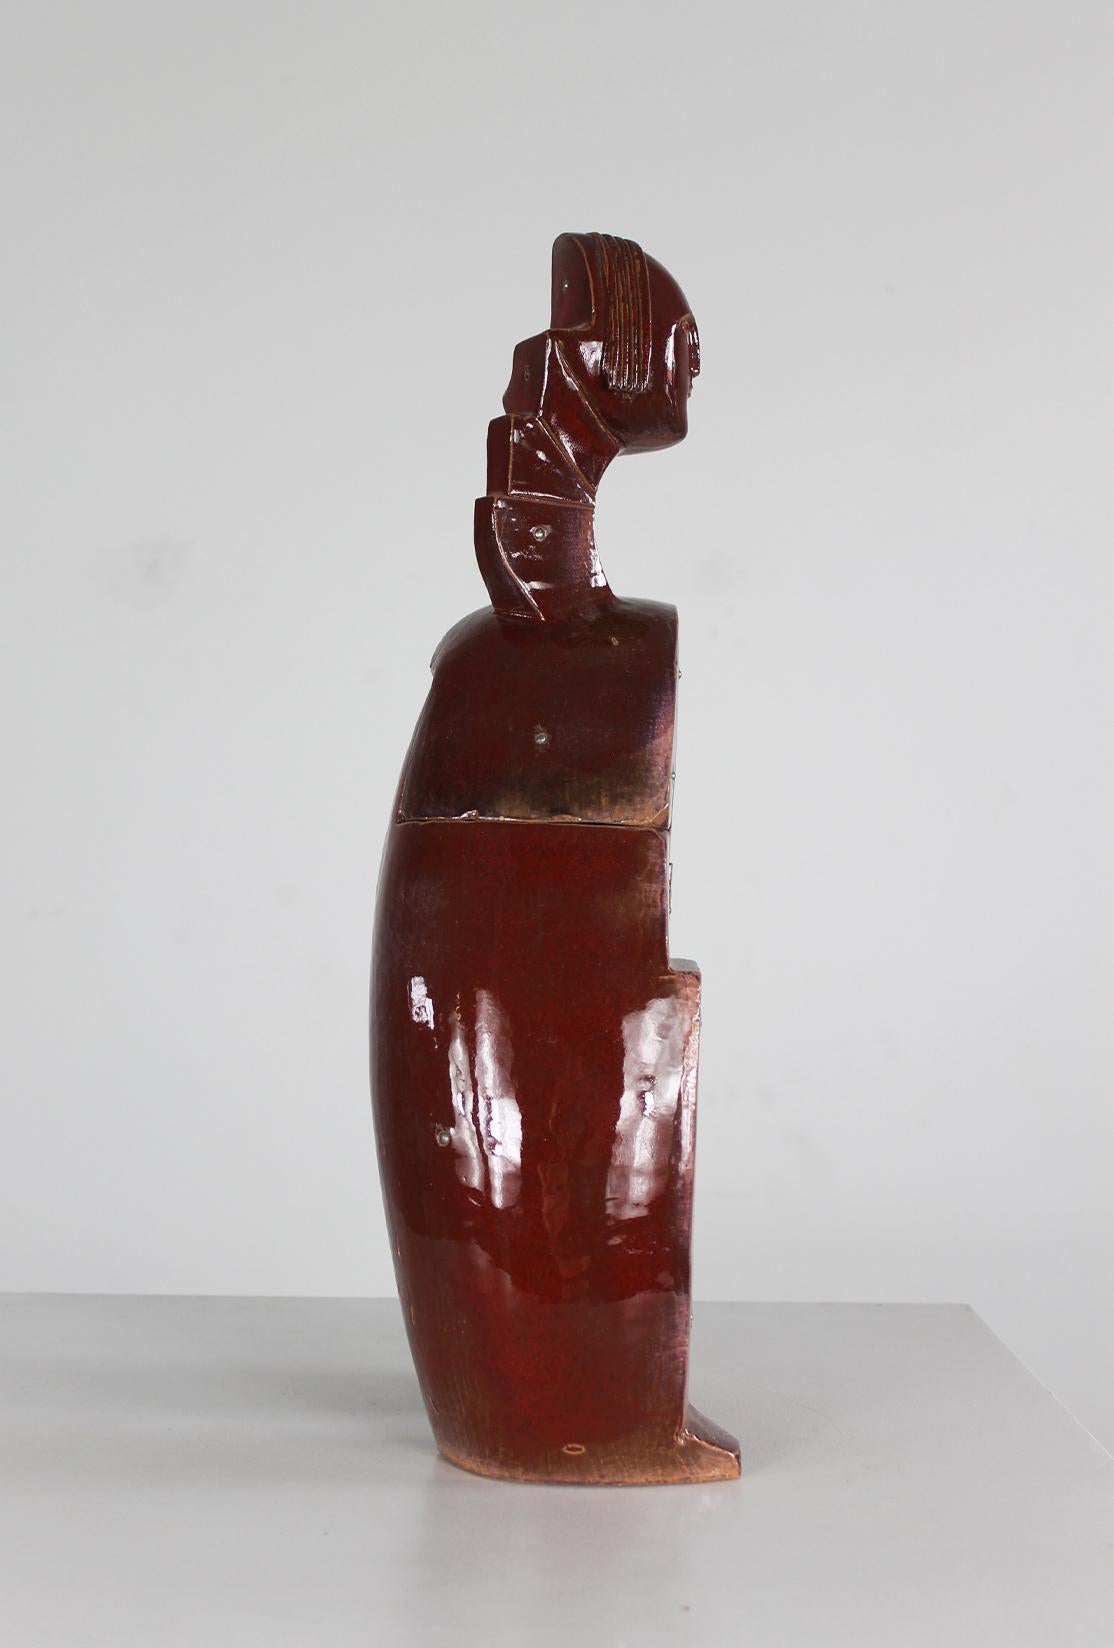 Late 20th Century Fabio Provinciali Sculpture in Glazed Terracotta with Metal Studs 1999  For Sale